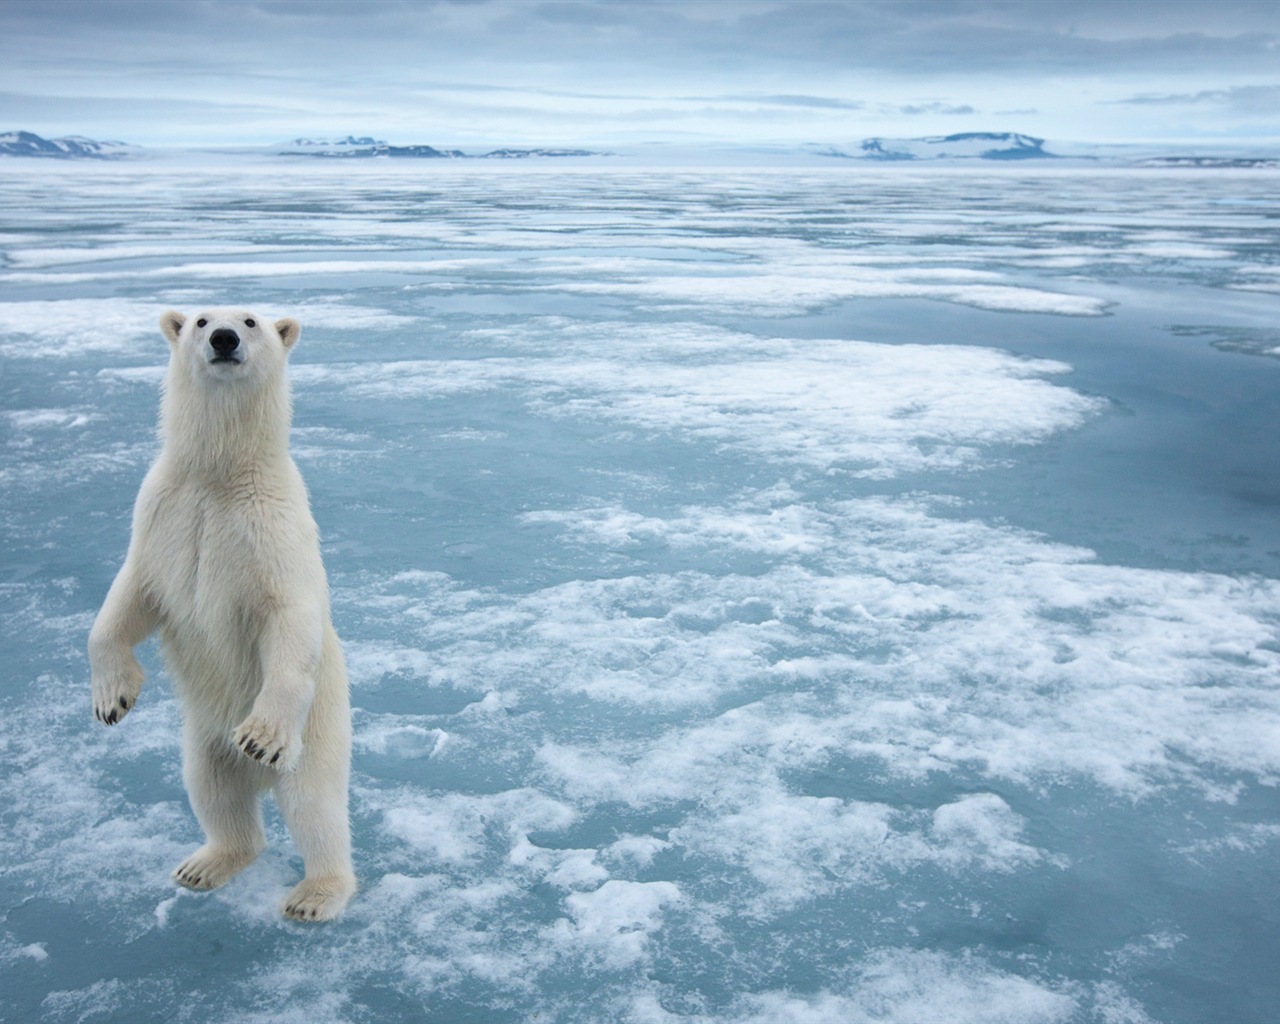 Windows 8 Wallpapers: Arctic, the nature ecological landscape, arctic animals #6 - 1280x1024